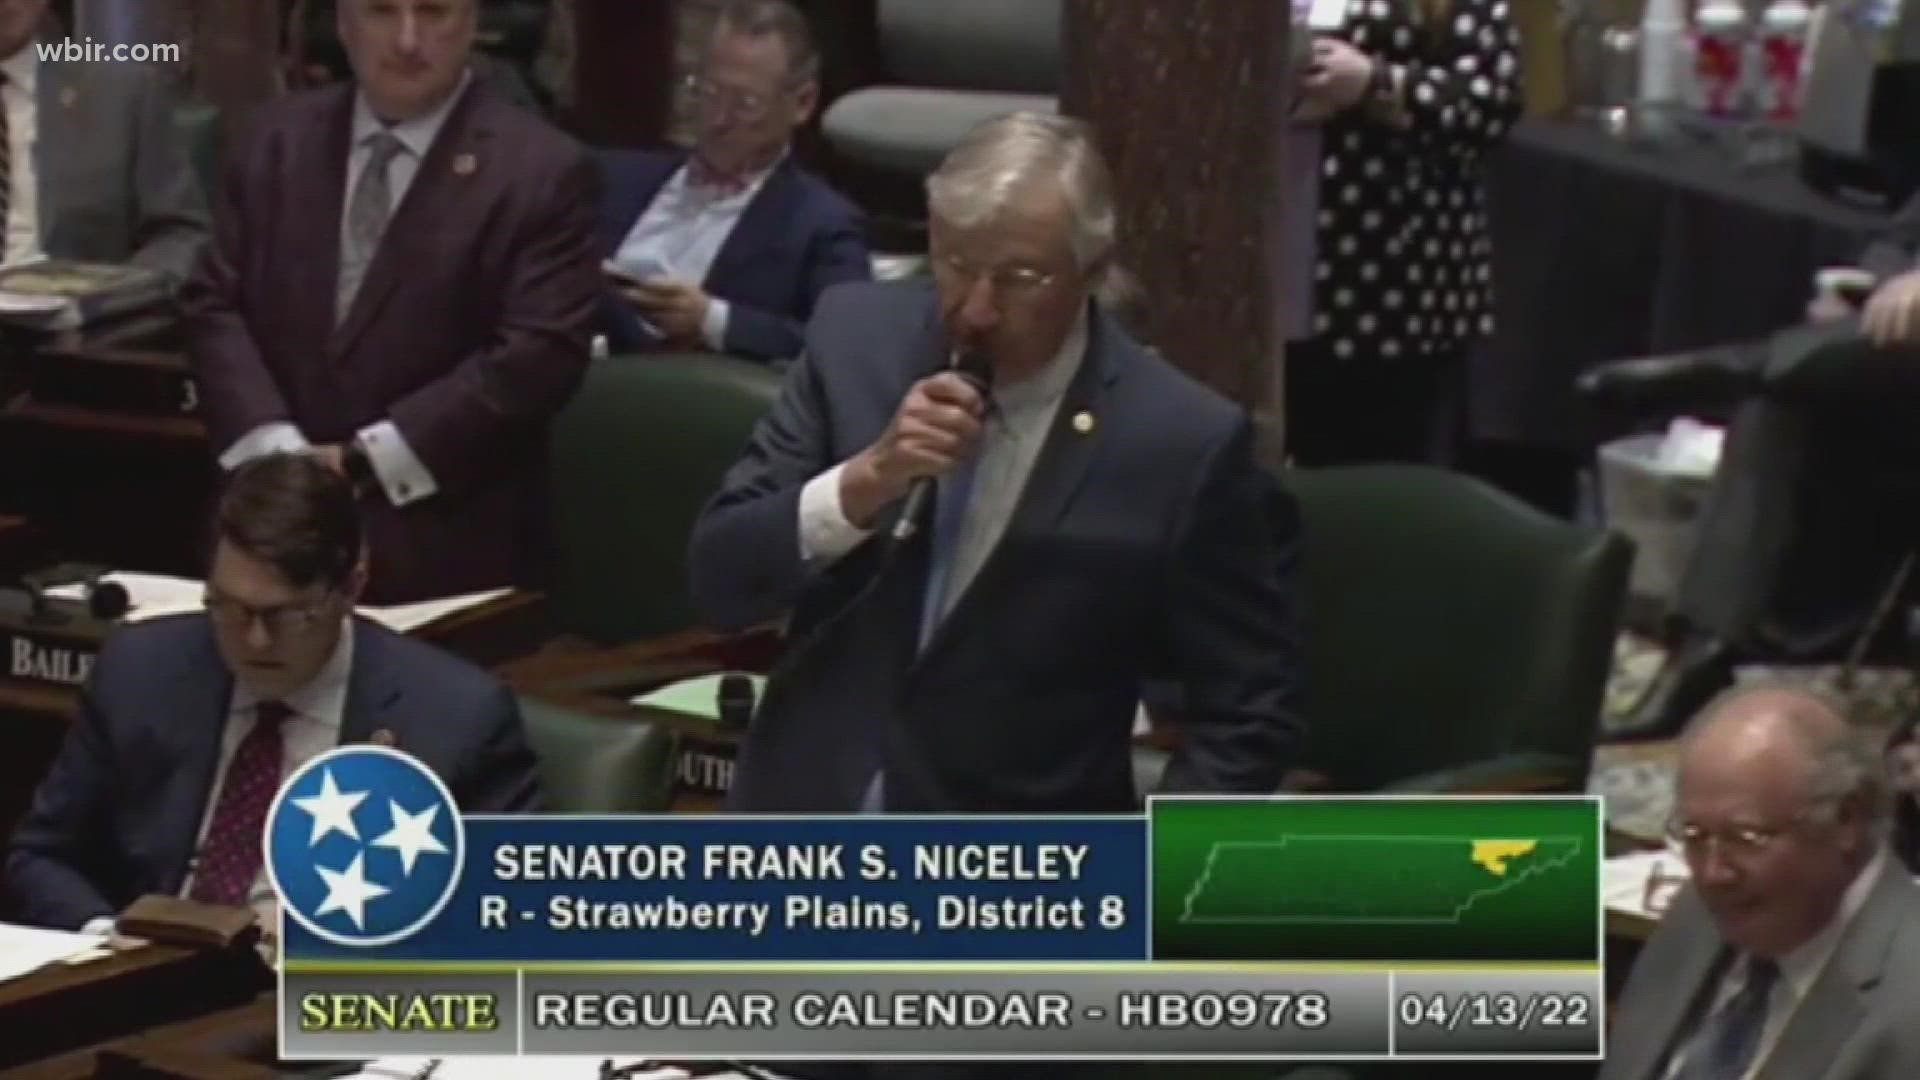 Senator Frank Niceley made comments suggesting that the homeless look to Hitler for inspiration.